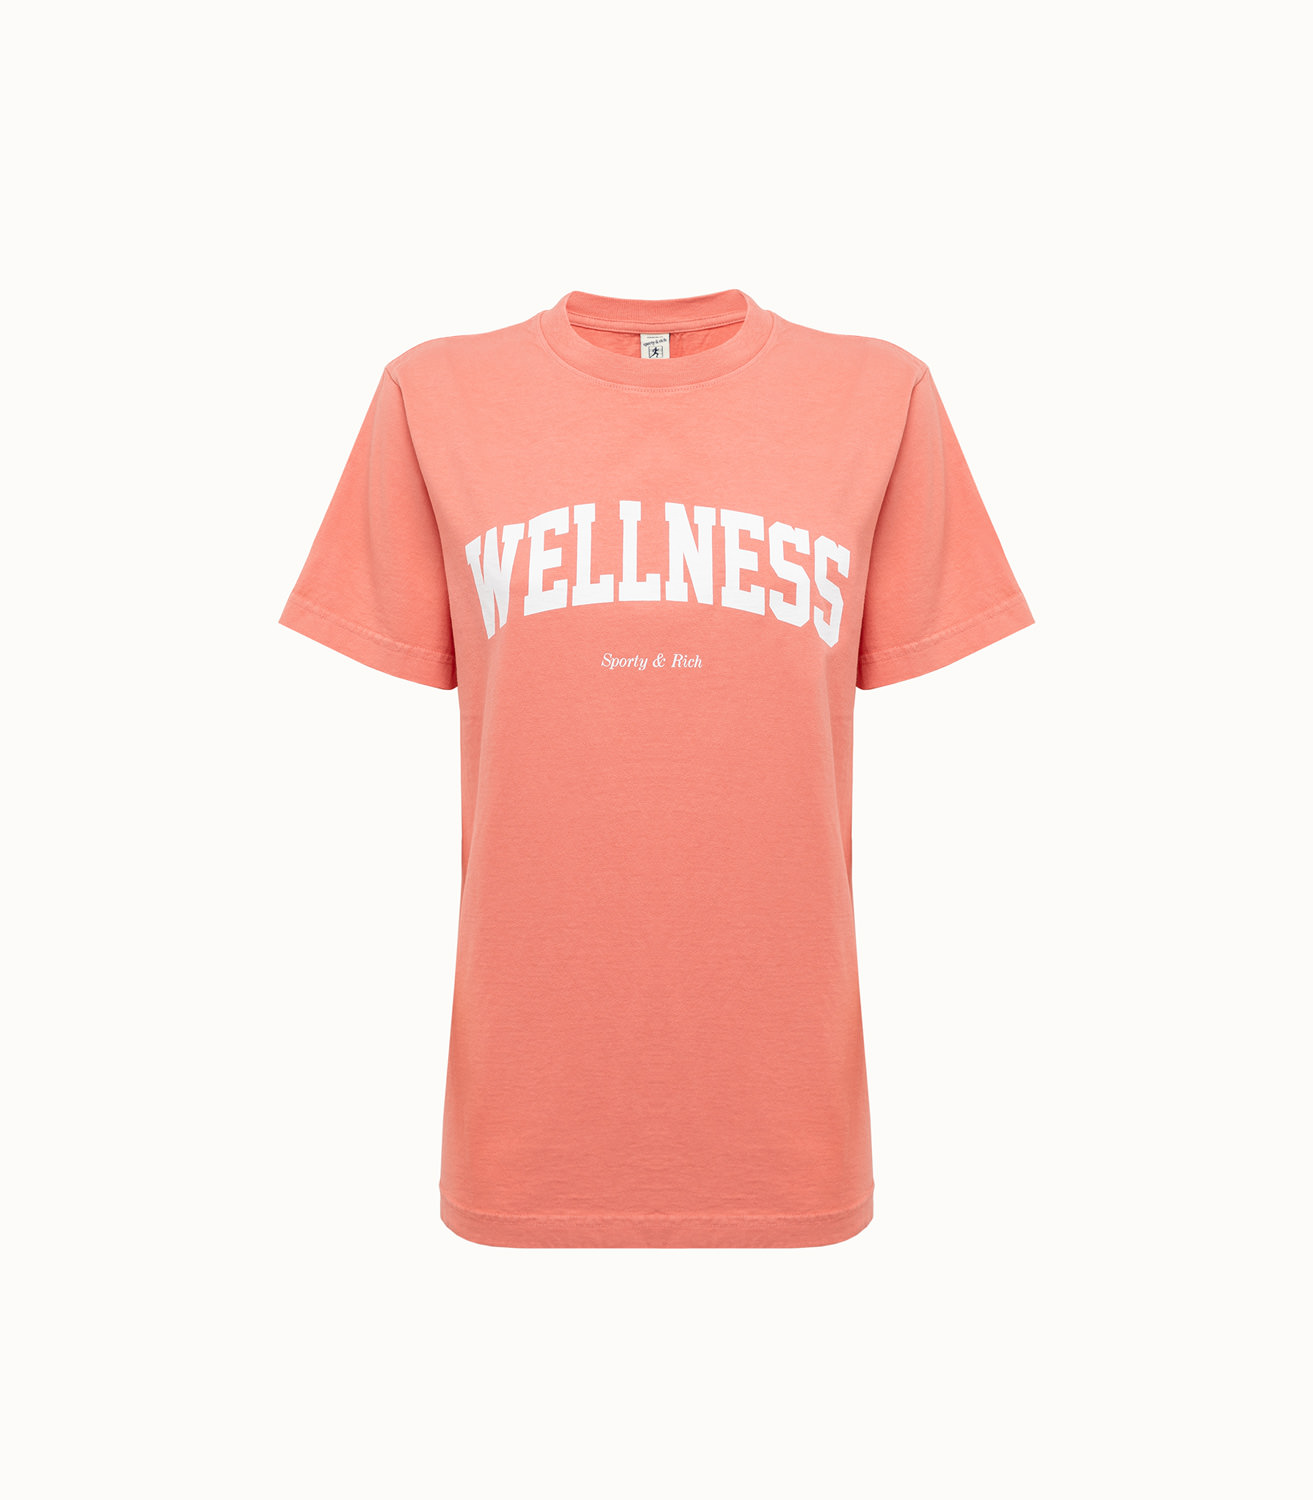 Solid Color Crew-Neck T-Shirt with Contrasting Print